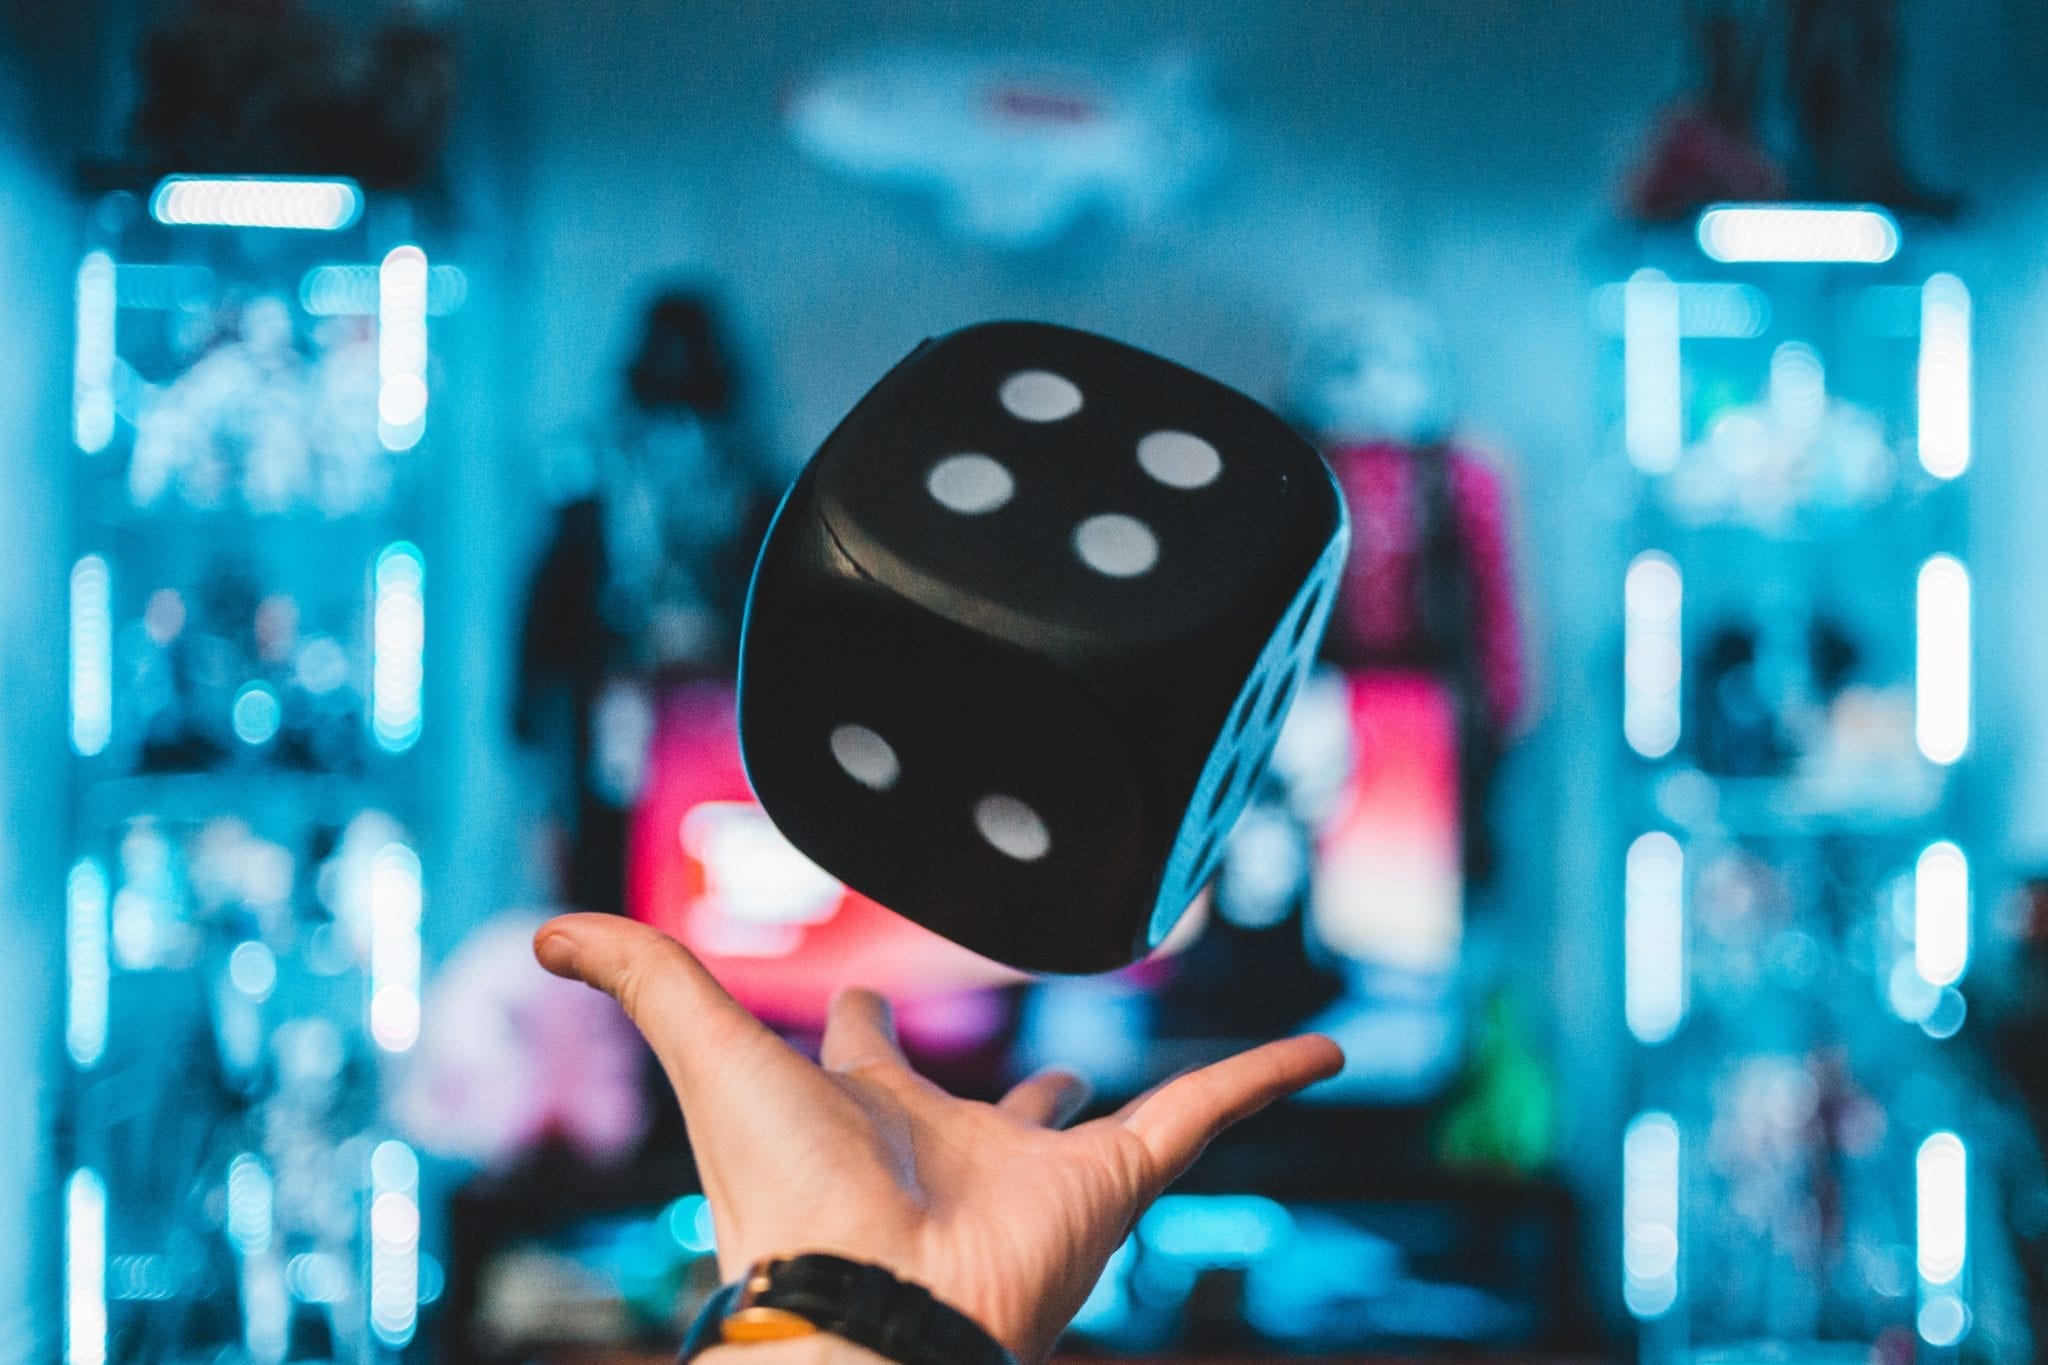 in-game shopping represented by hand tossing large dice